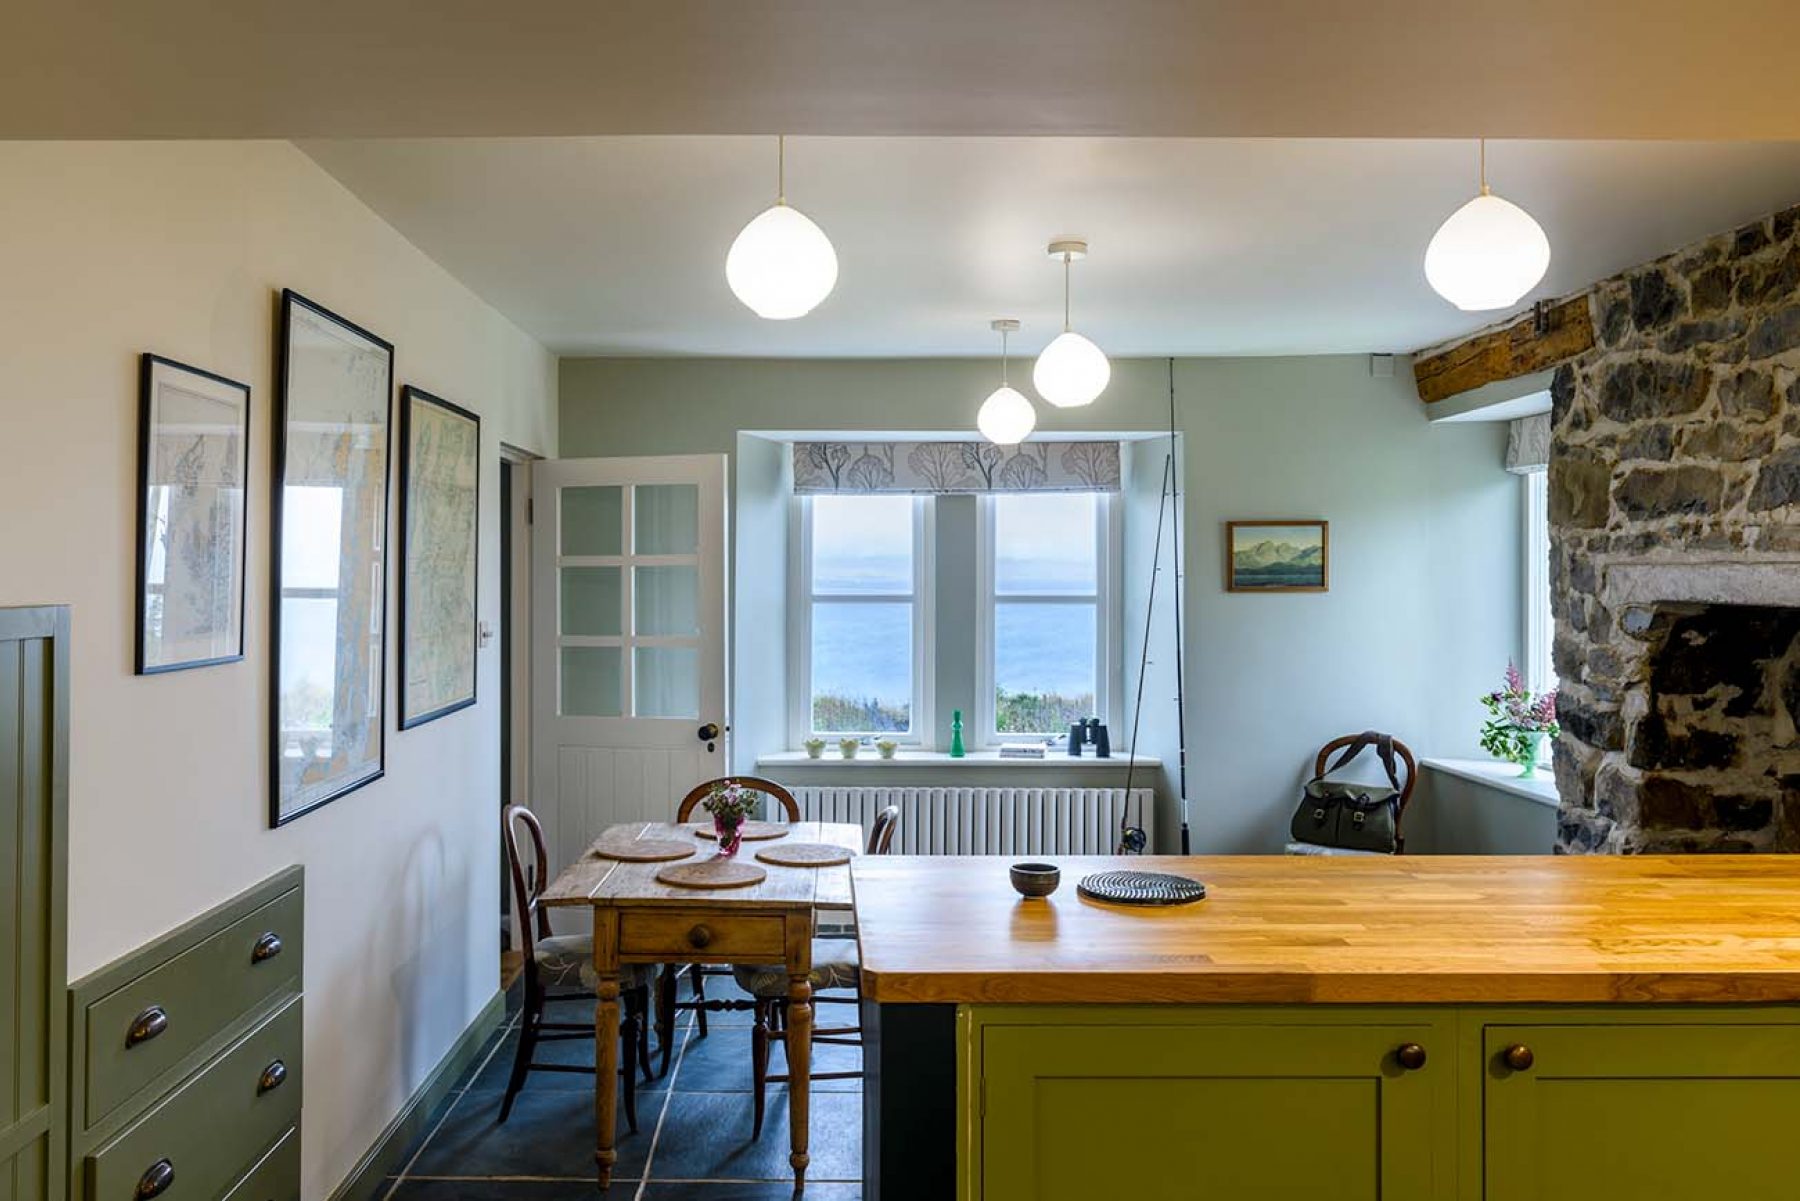 Croft House. A spacious, slate-floored kitchen and dining area feature a fully equipped deVOL hand-crafted Shaker kitchen.